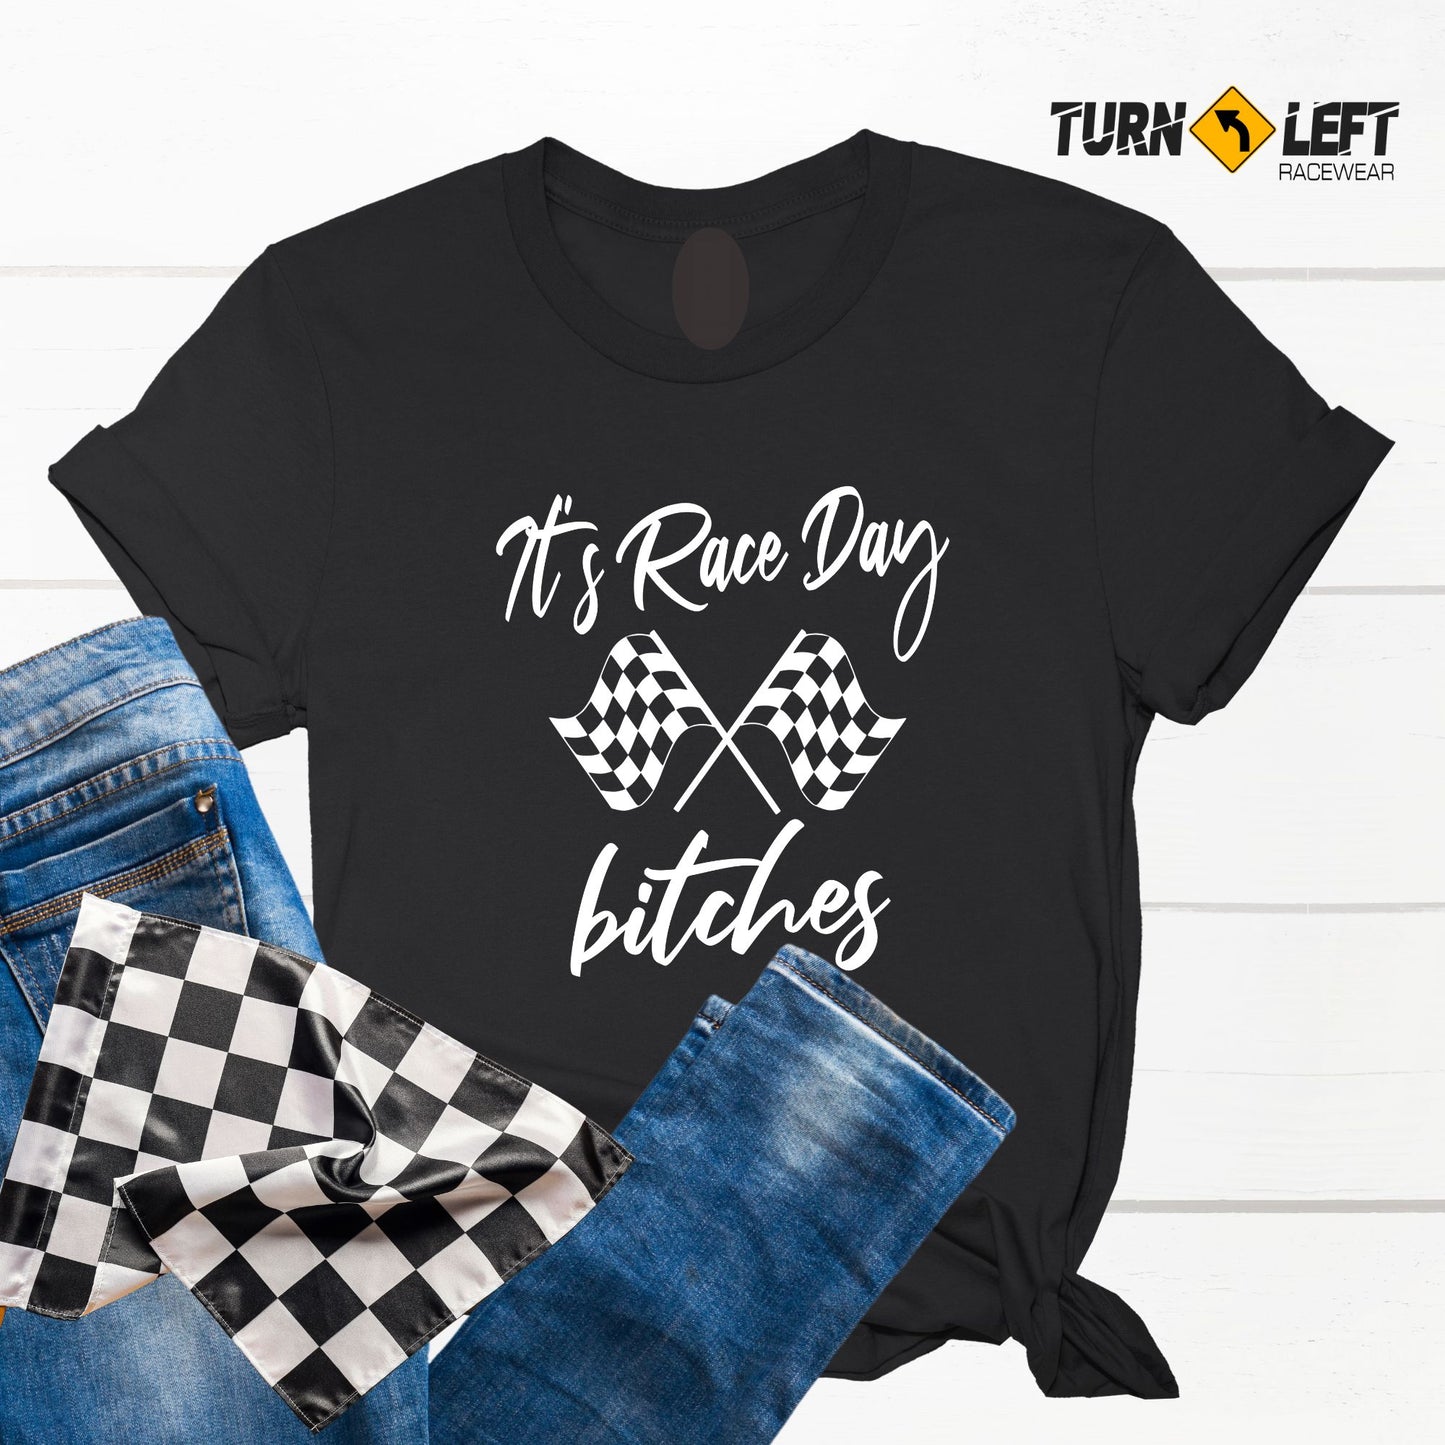 It's Race Day Bitches T-shirt Dirt Track racing shirts. Raceday Checkered flag t-shirts. Women's racing gifts